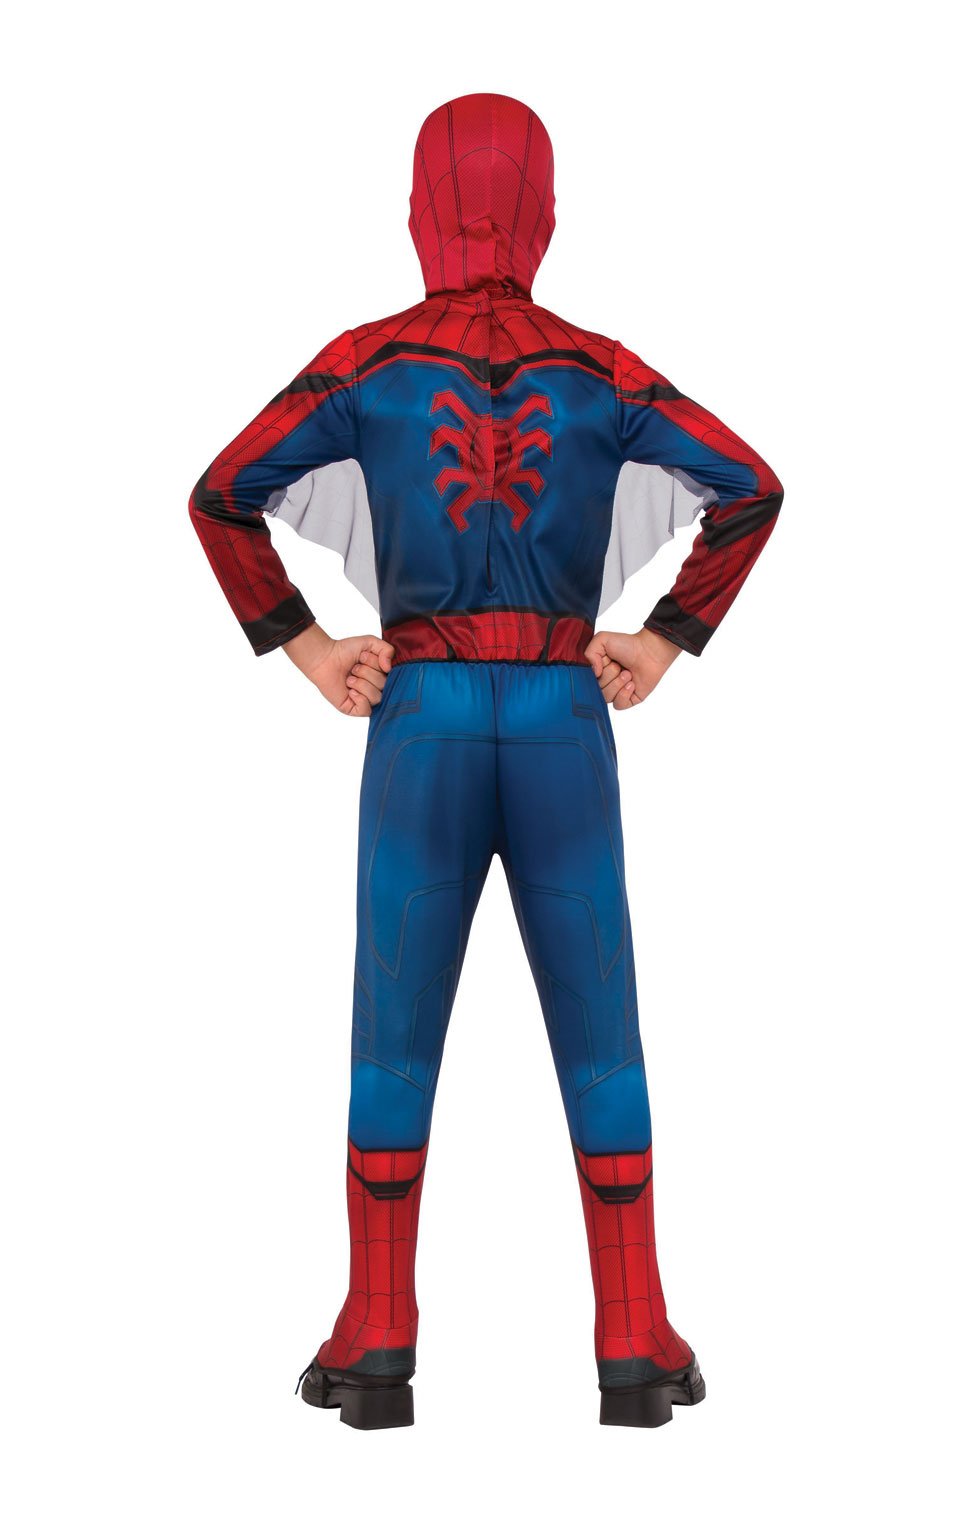 Rubie's Costume Spider-Man Homecoming Child's Costume, Small, Multicolor